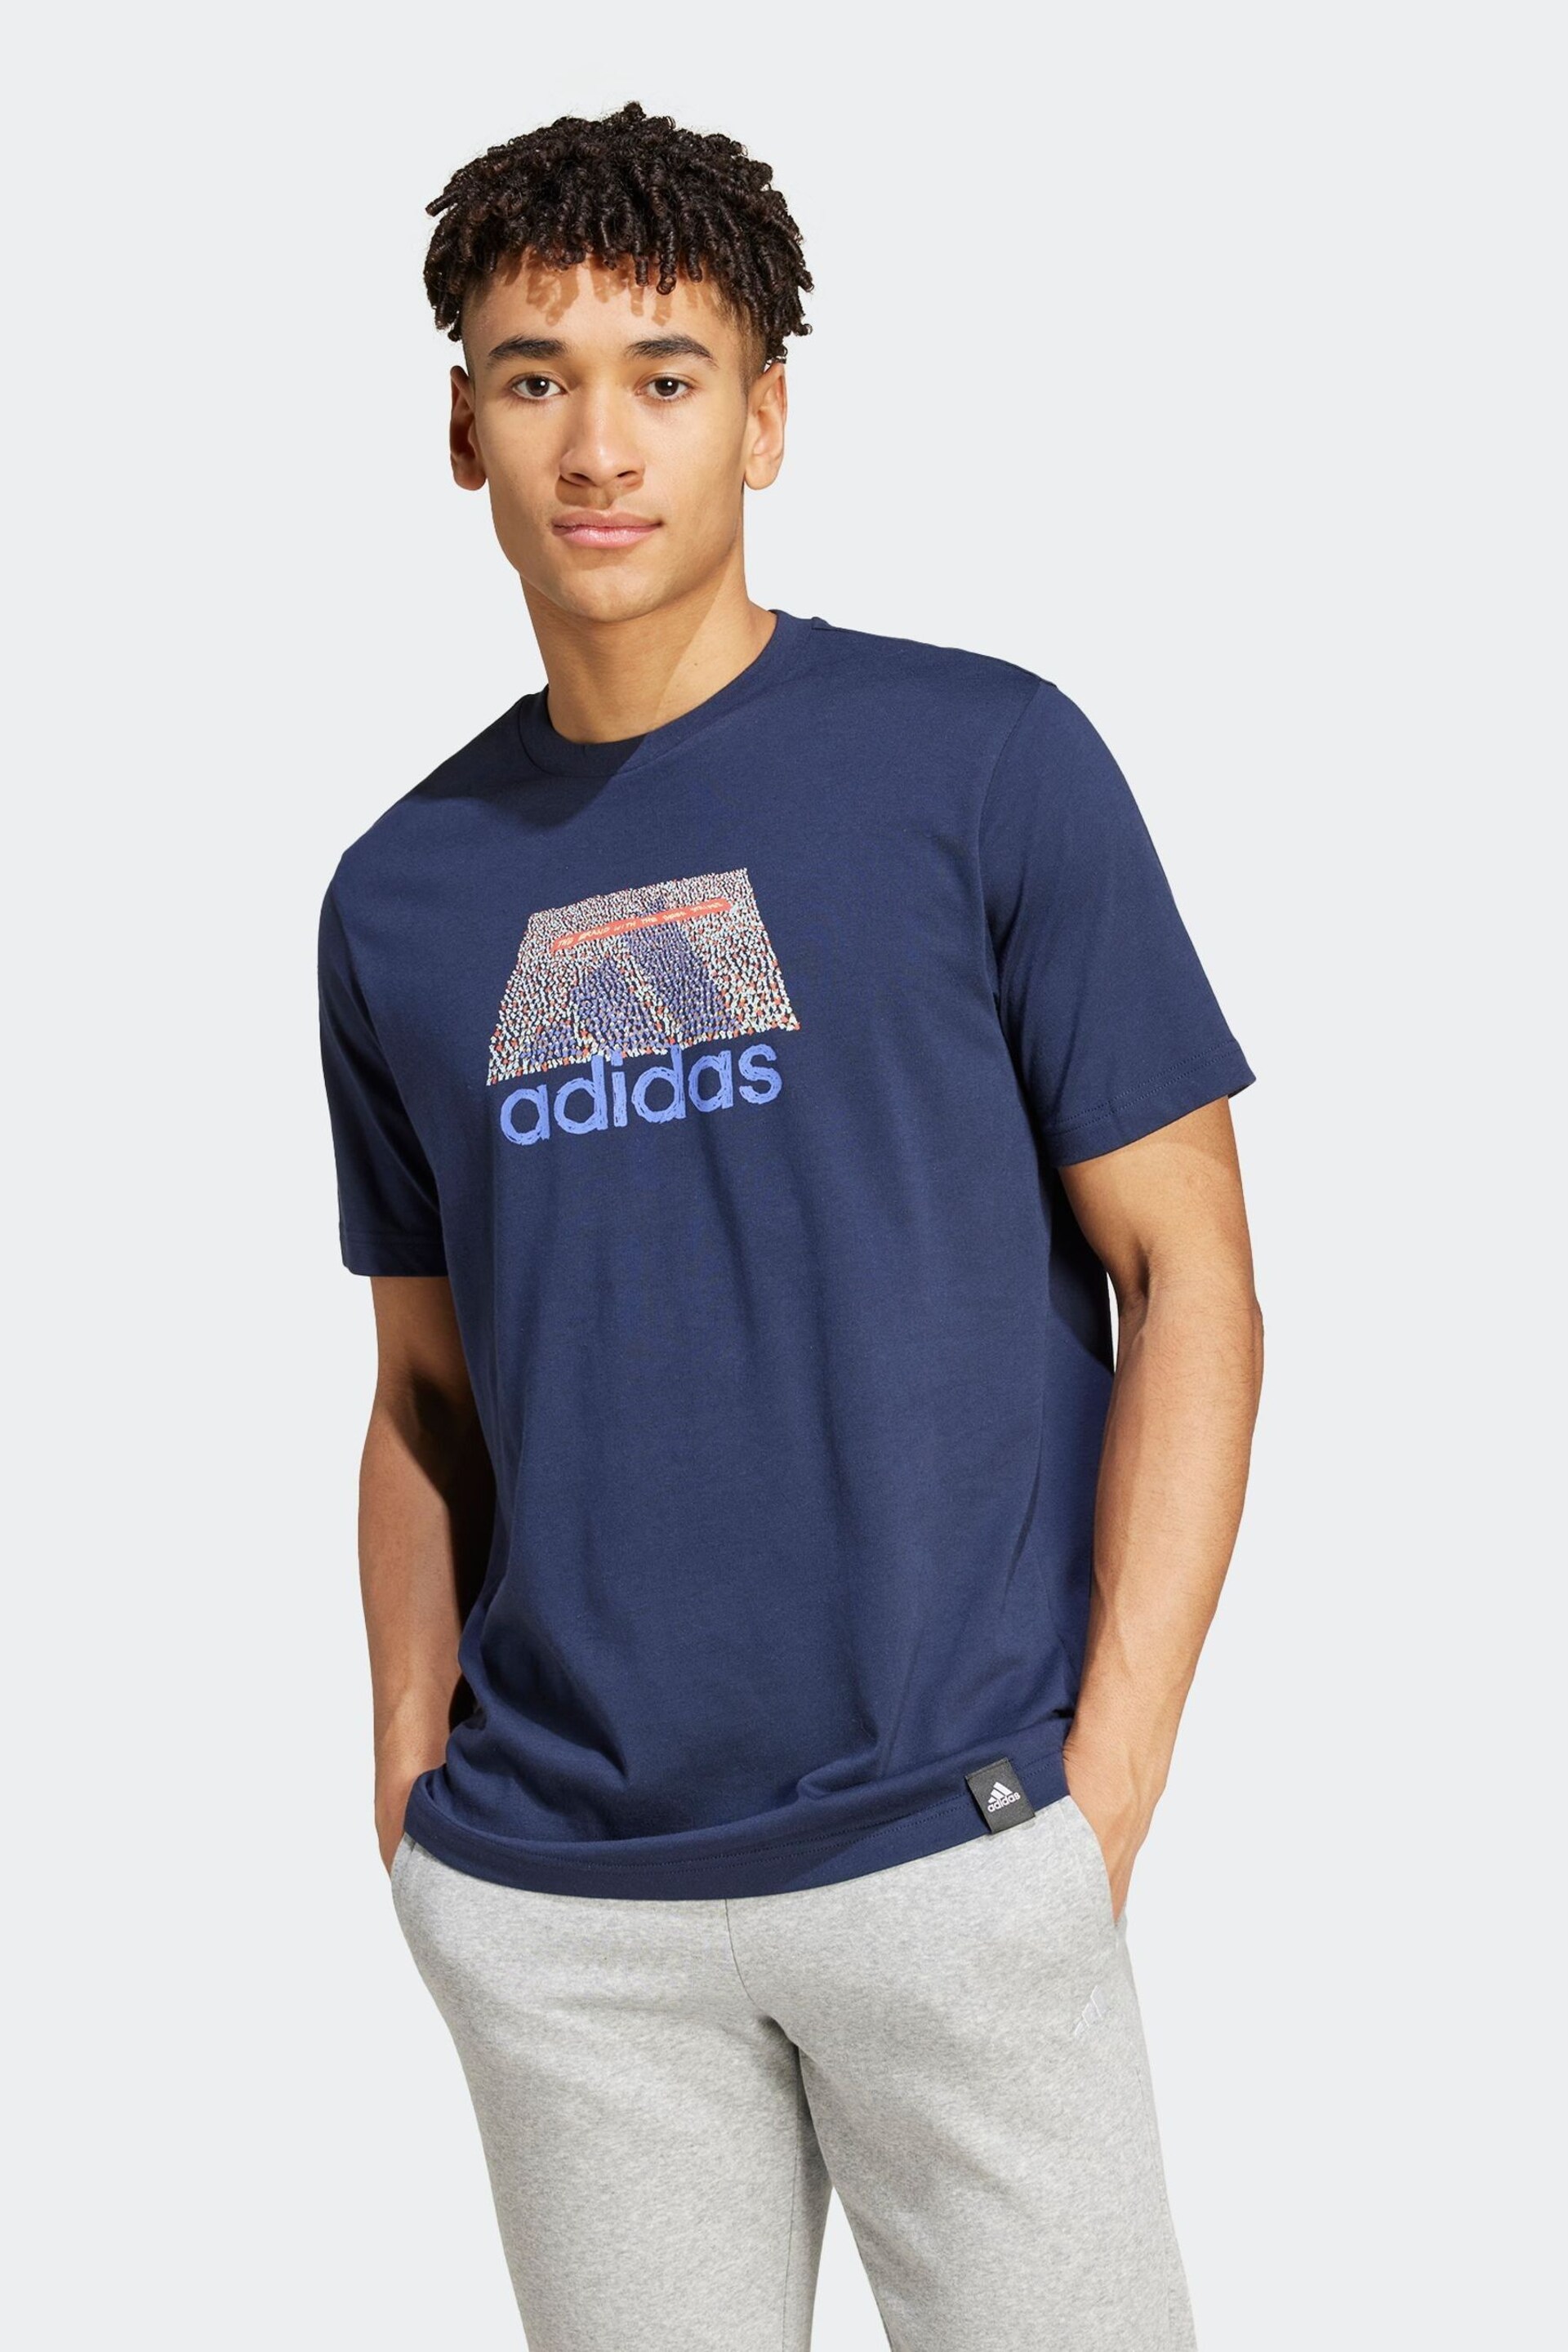 adidas Blue Codes Graphic T-Shirt - Image 3 of 7